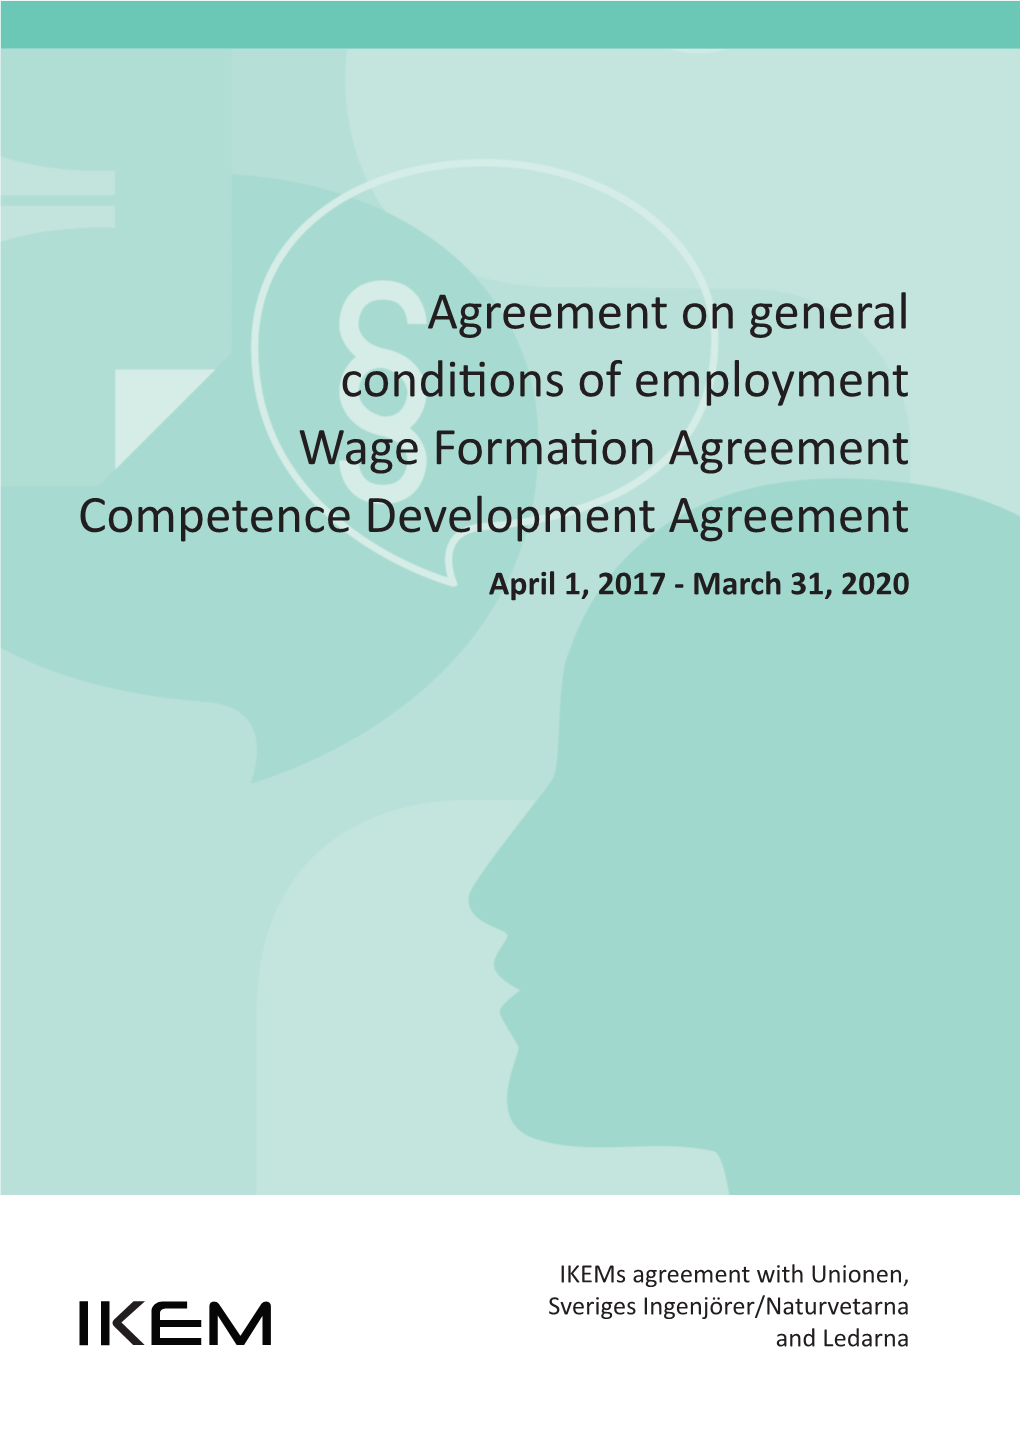 Agreement on General Conditions of Employment Wage Formation Agreement Competence Development Agreement April 1, 2017 - March 31, 2020